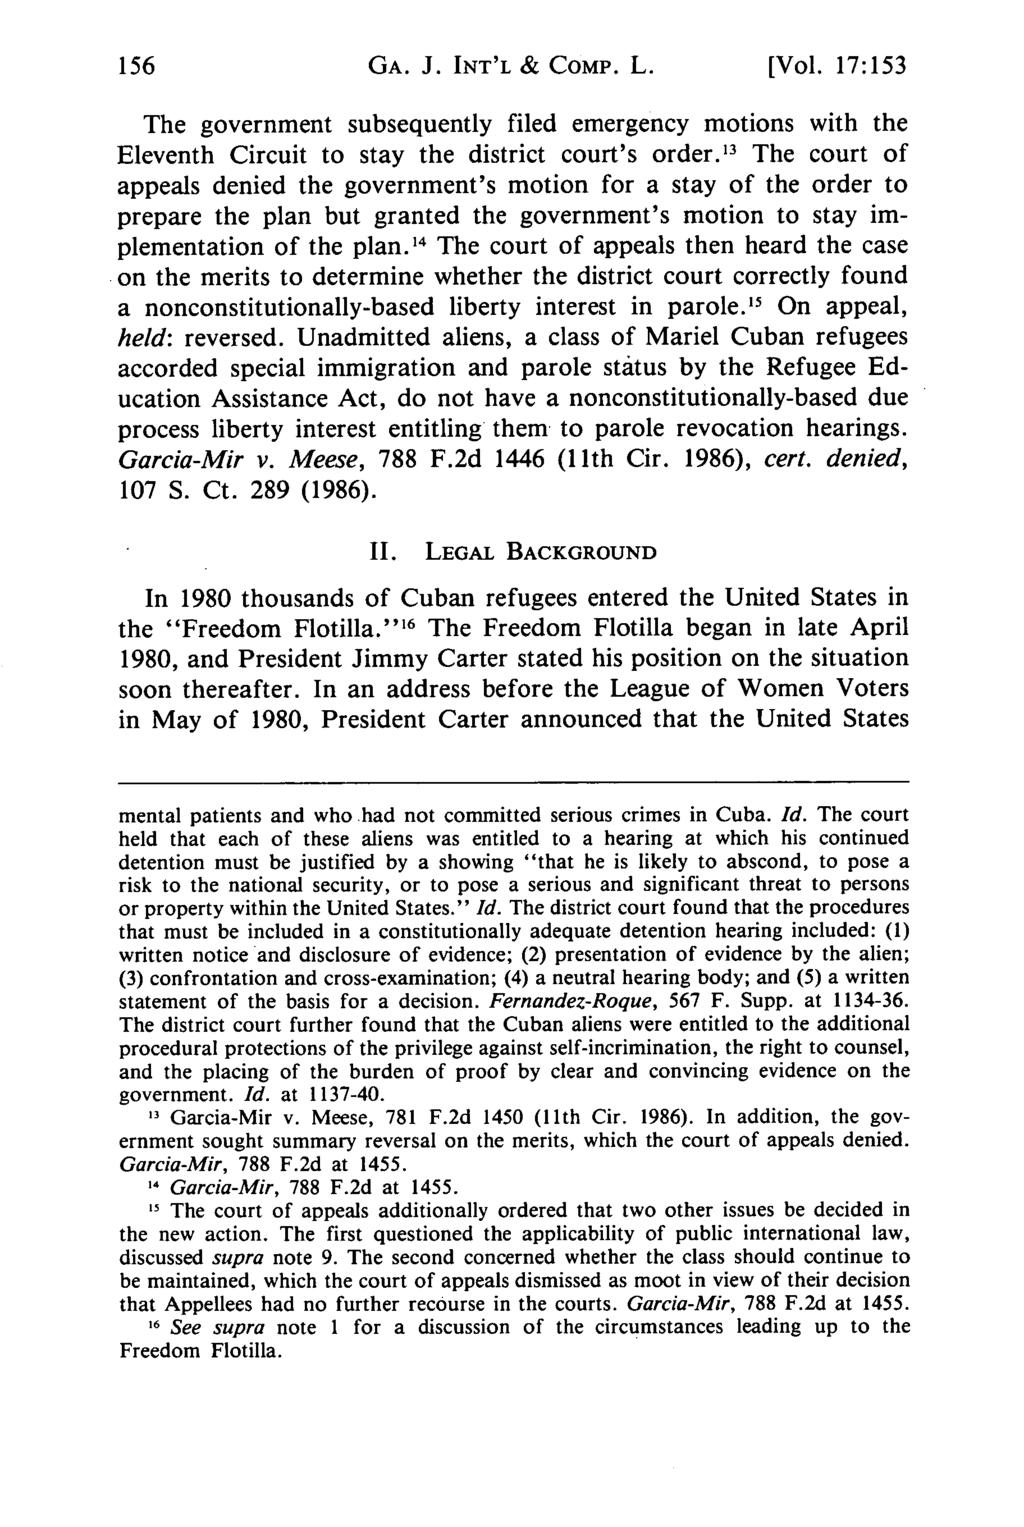 GA. J. INT'L & COMP. L. [Vol. 17:153 The government subsequently filed emergency motions with the Eleventh Circuit to stay the district court's order.